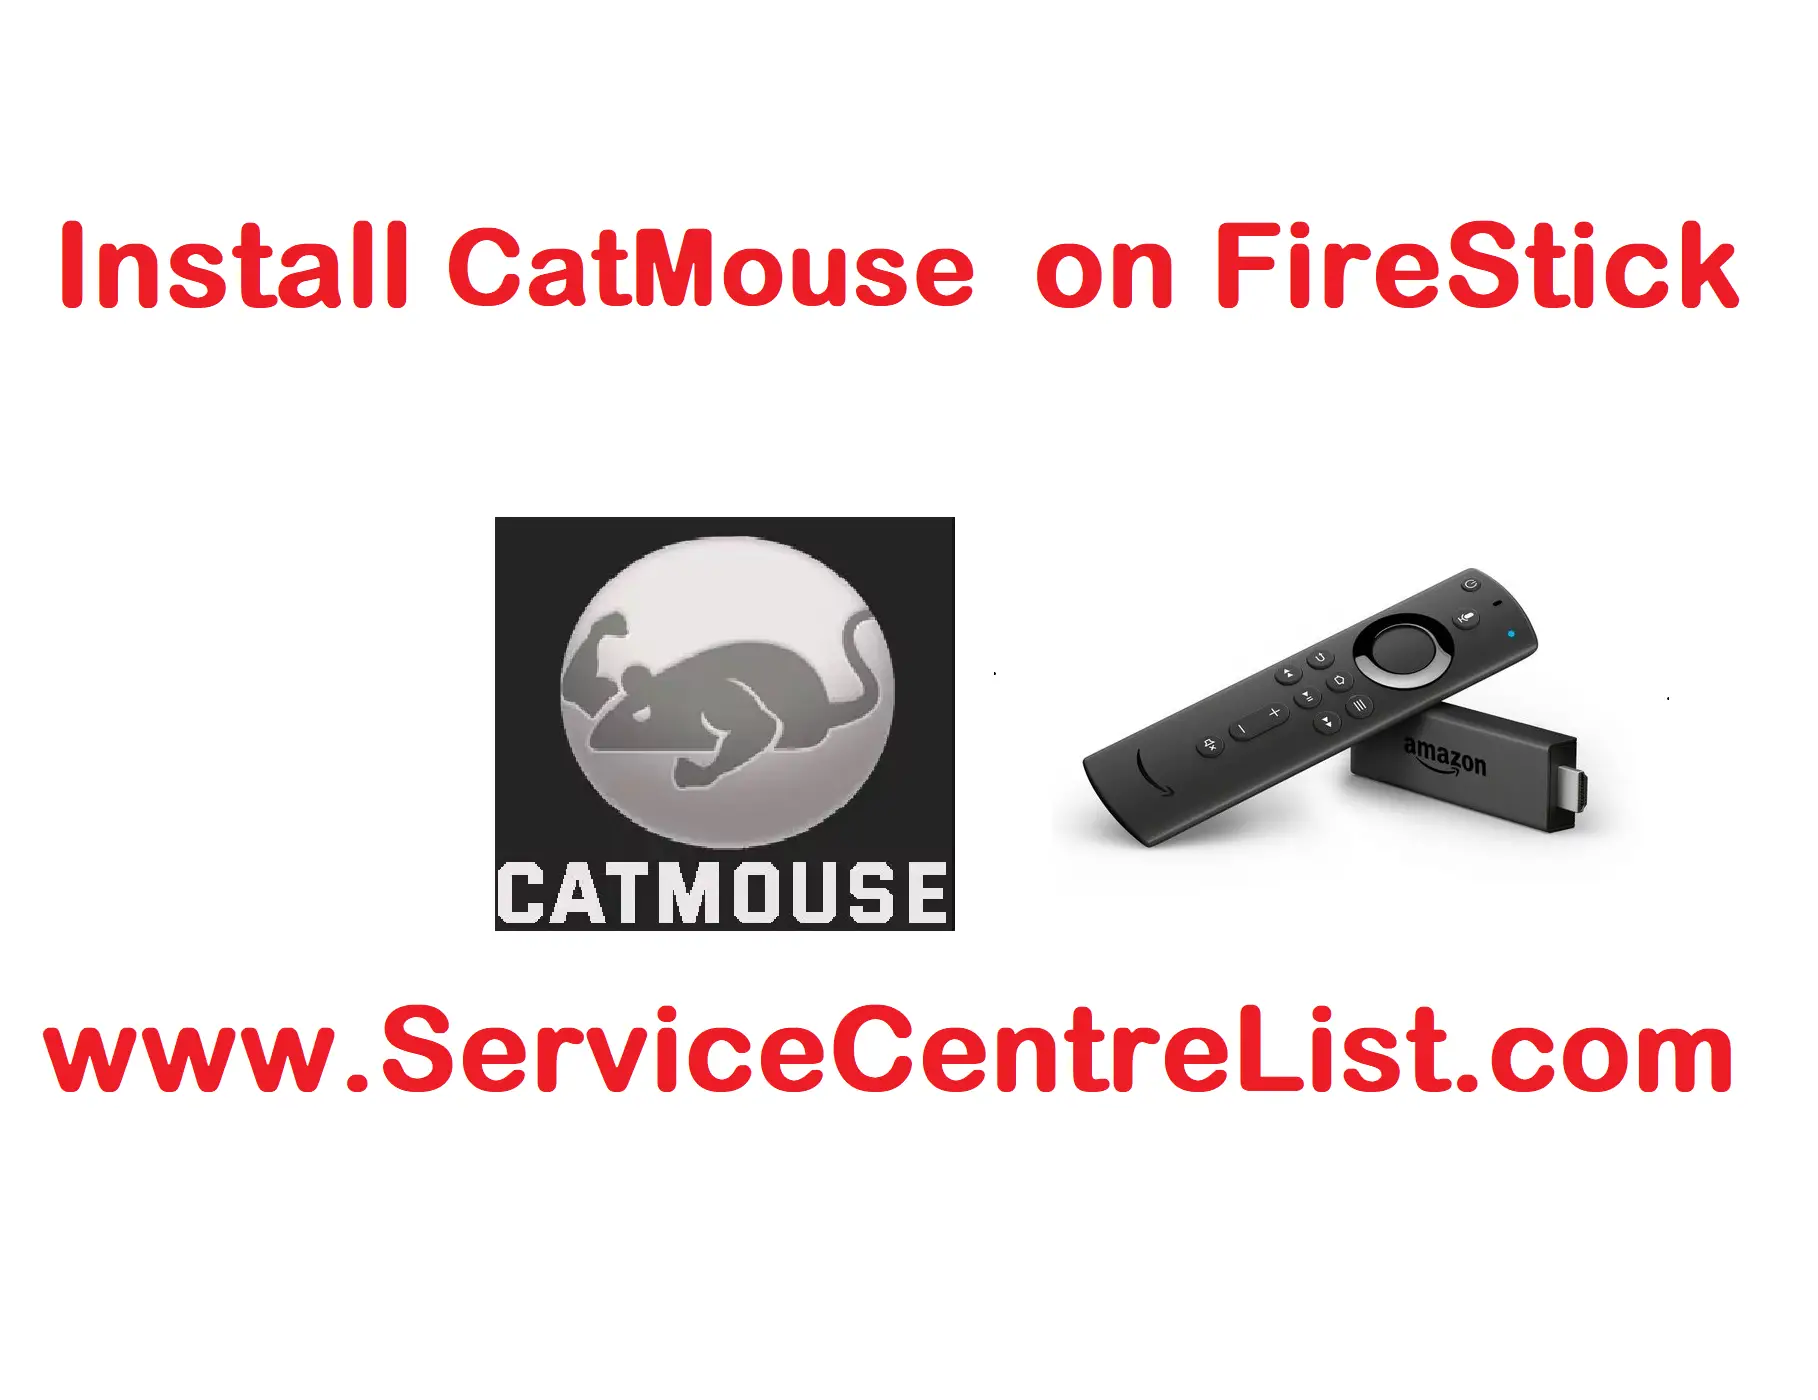 install CatMouse on firestick